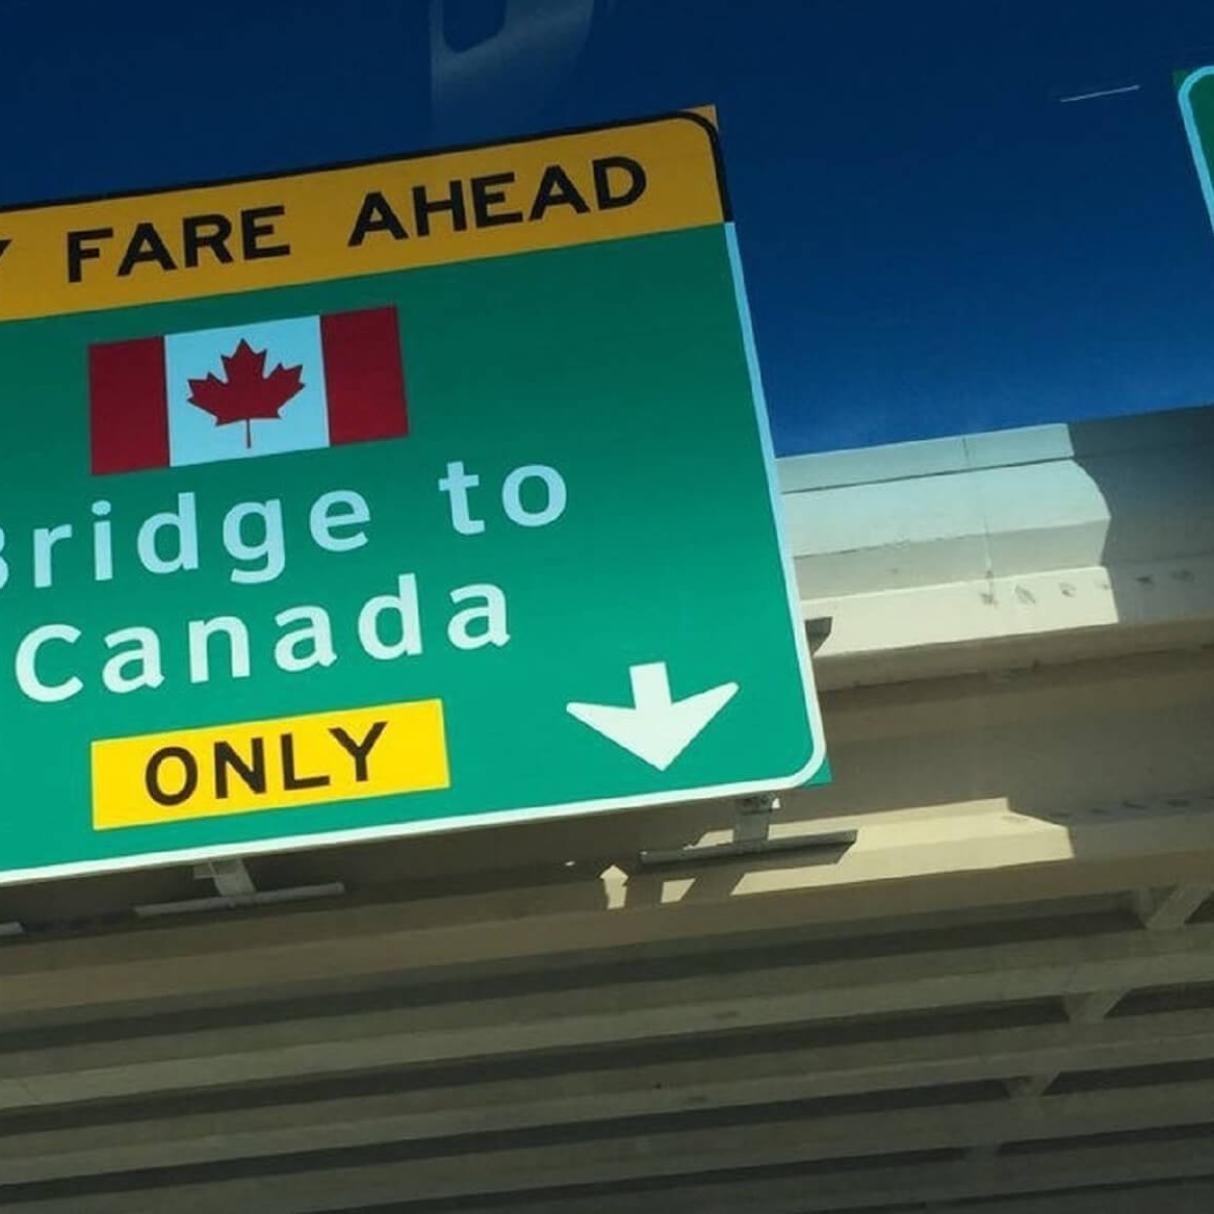 A road sign reading "Bridge to Canada"